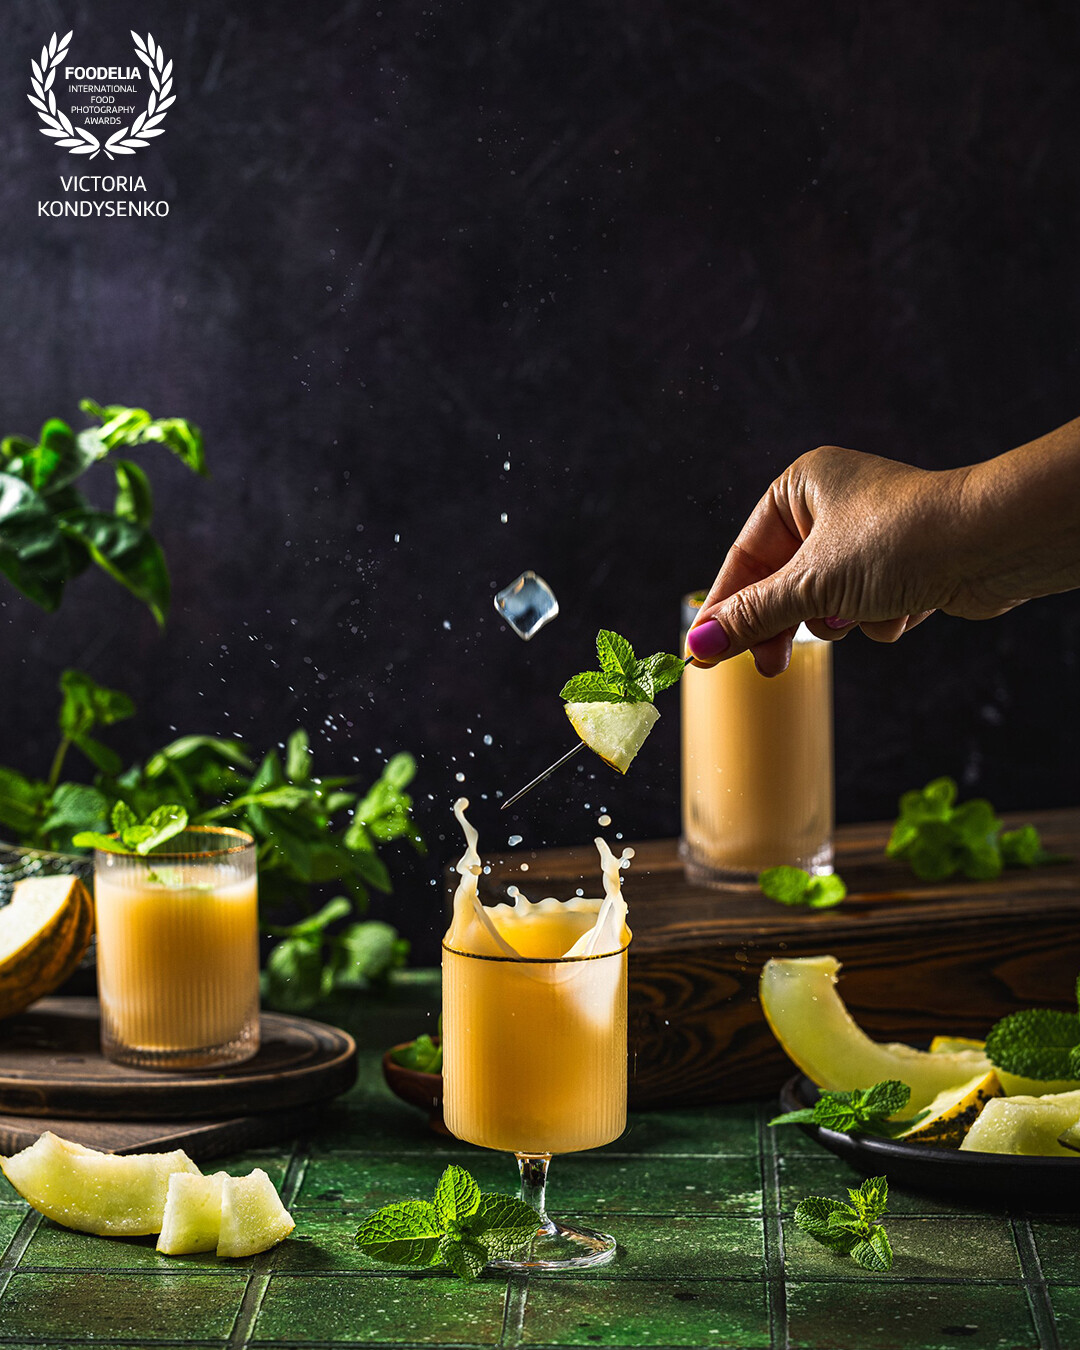 A refreshing summer melon drink. Promotional photo shoot of the local Ukrainian family cafe. Fly and splash food.